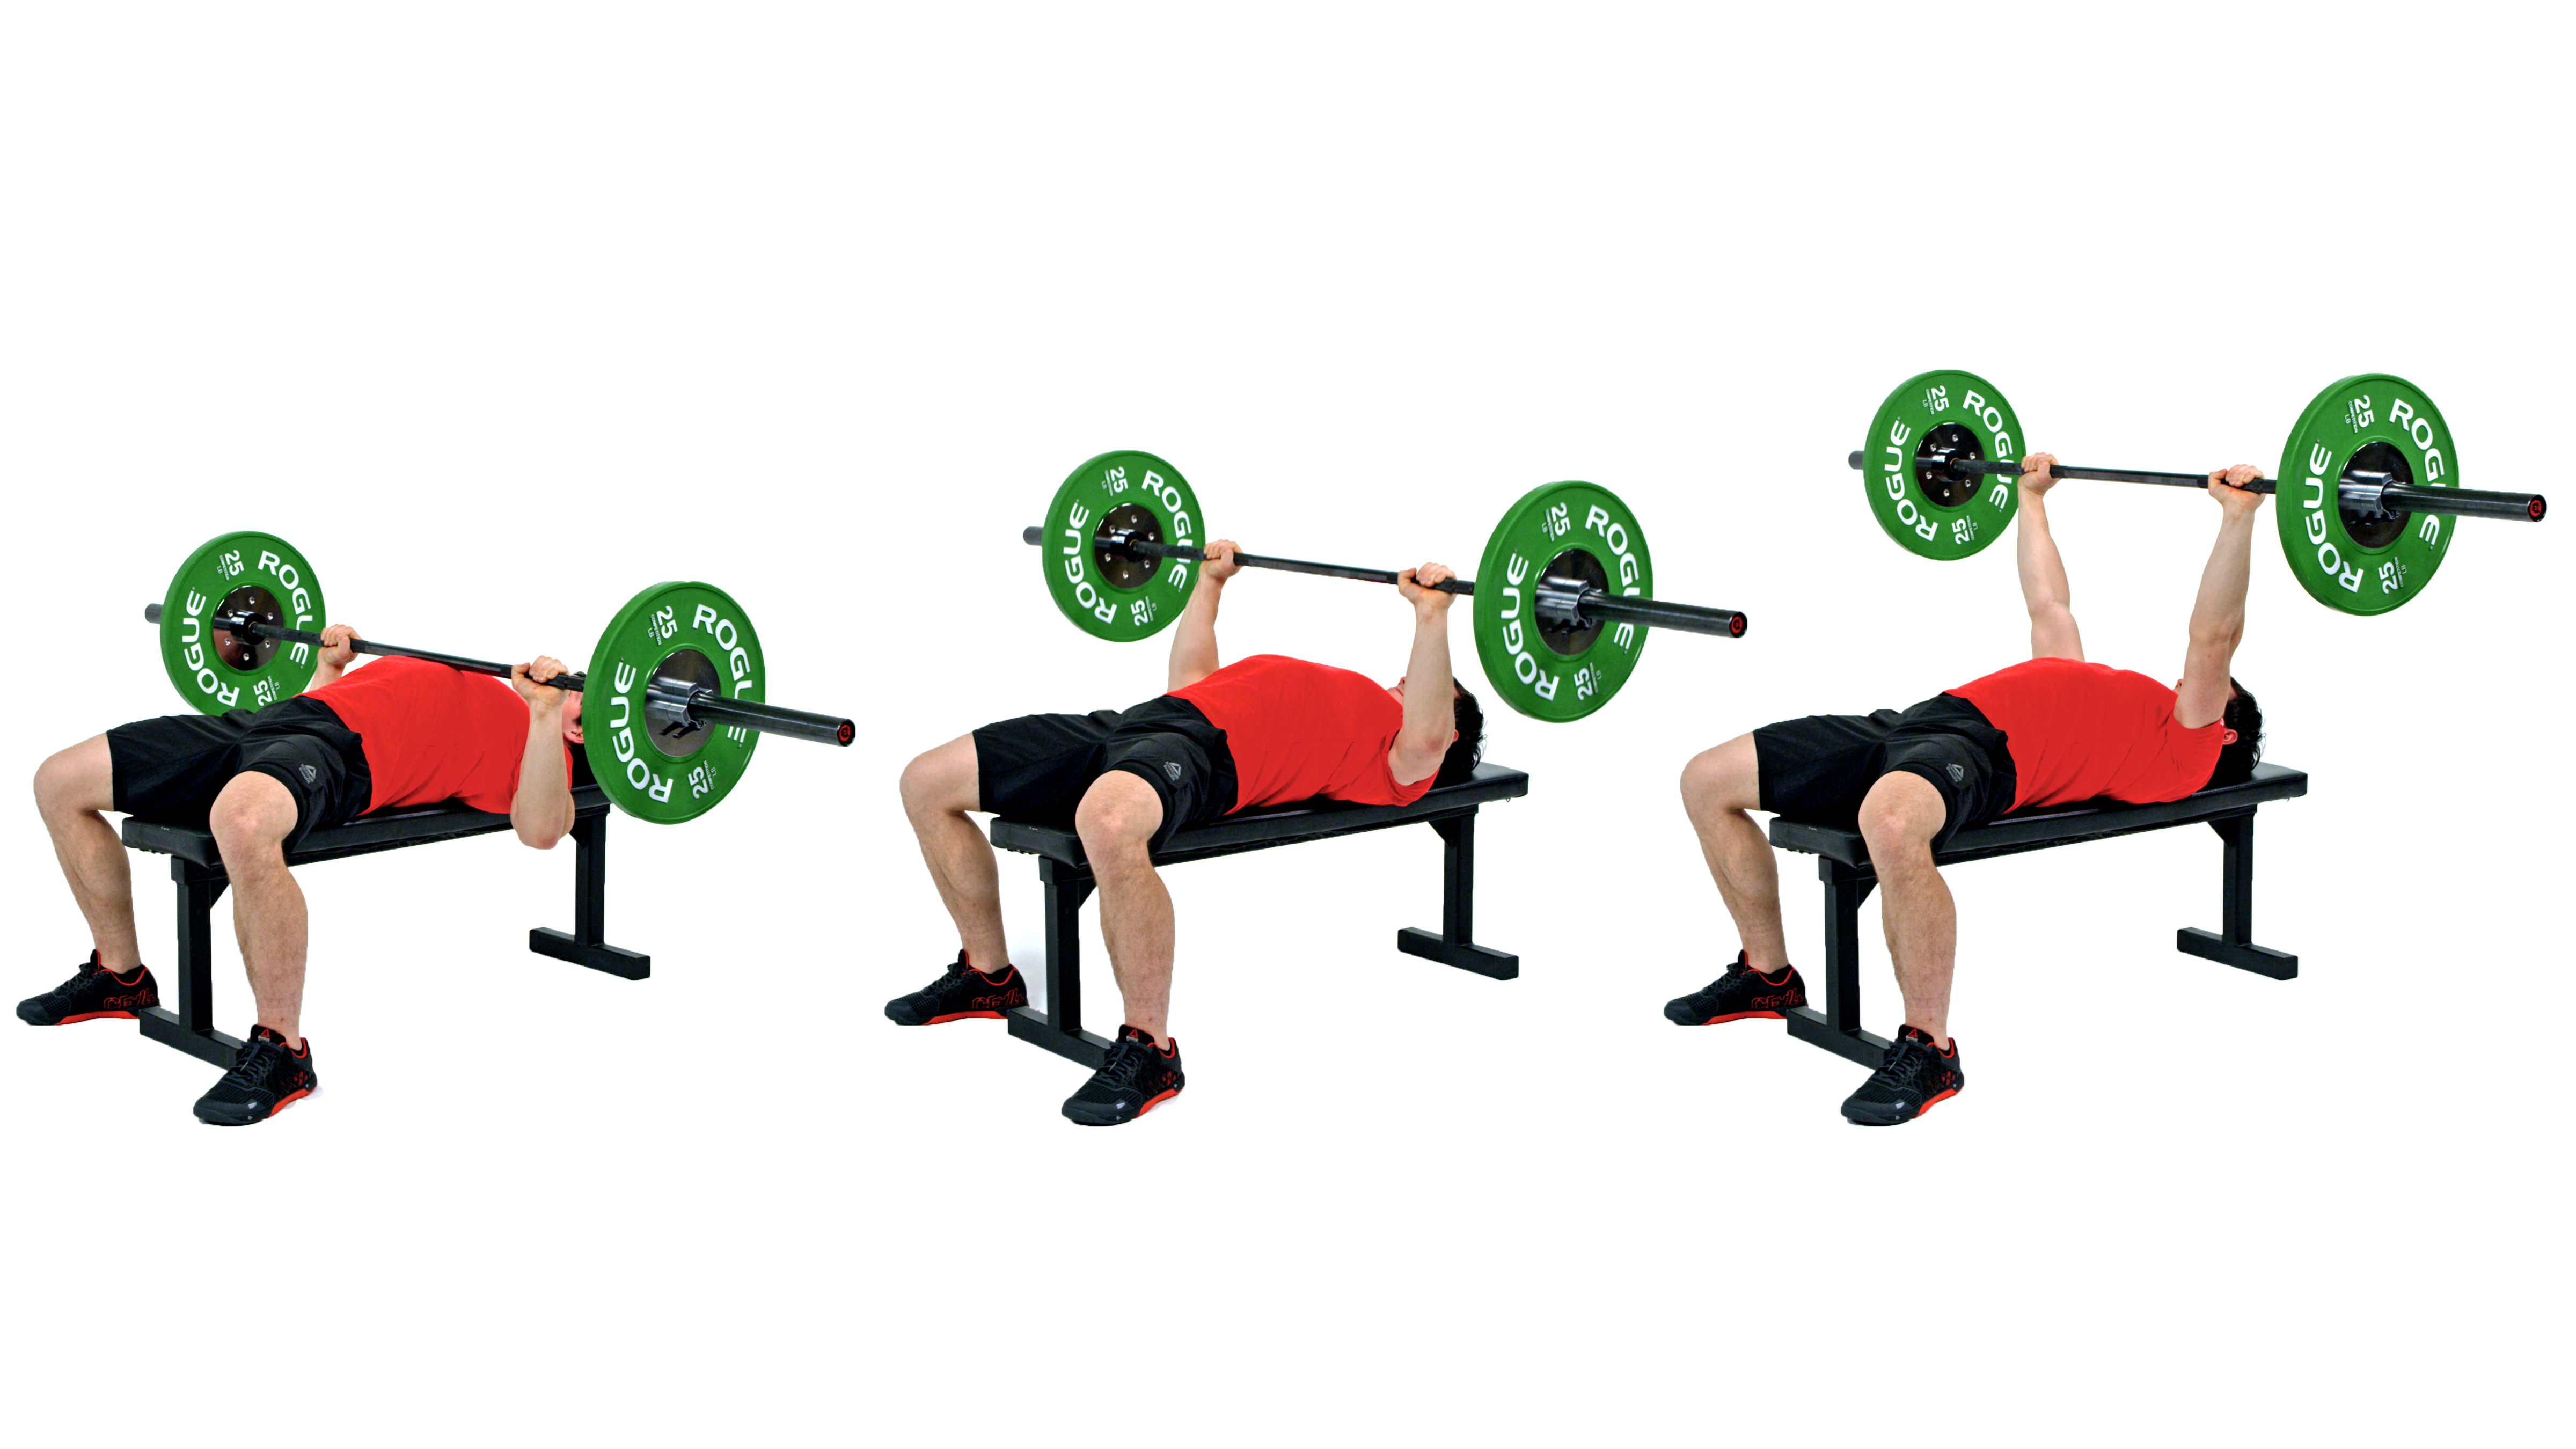 https://www.crossfit.com/wp-content/uploads/2019/05/01151551/Bench-Press-Collage.png